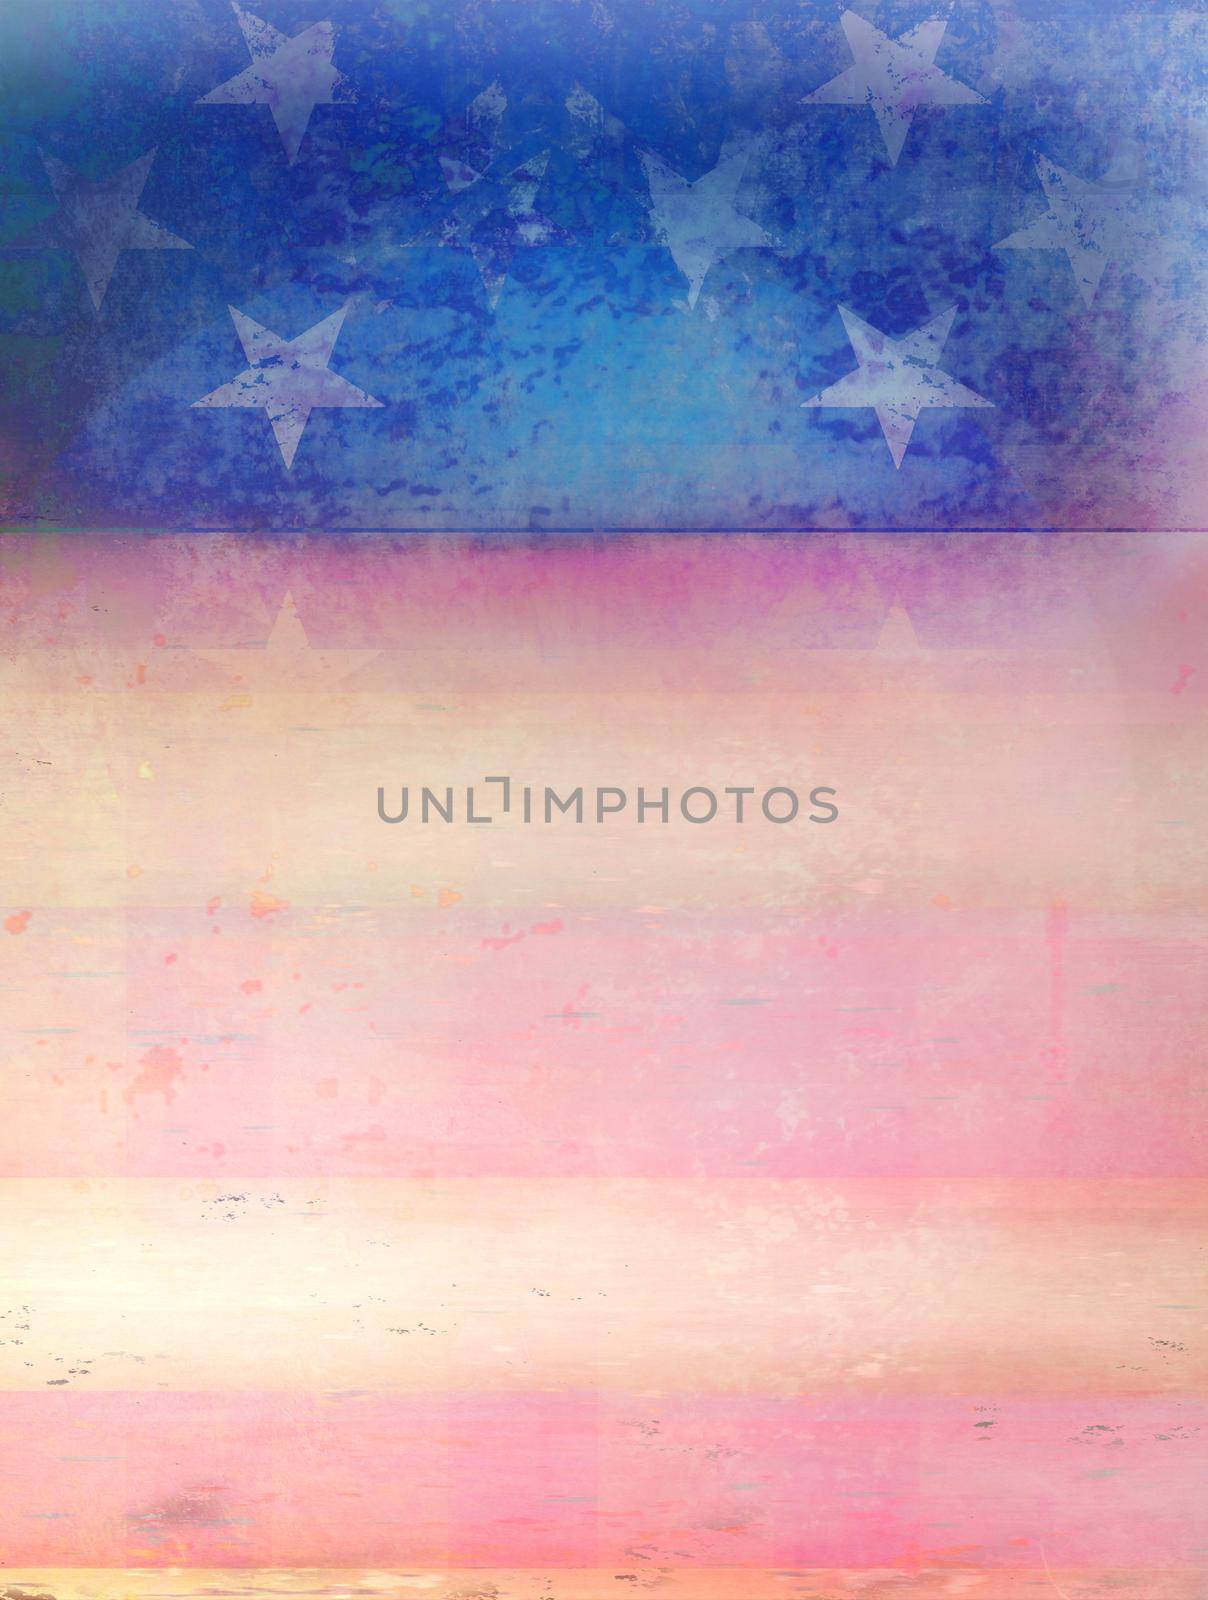 Grungy american flag frame by JackyBrown